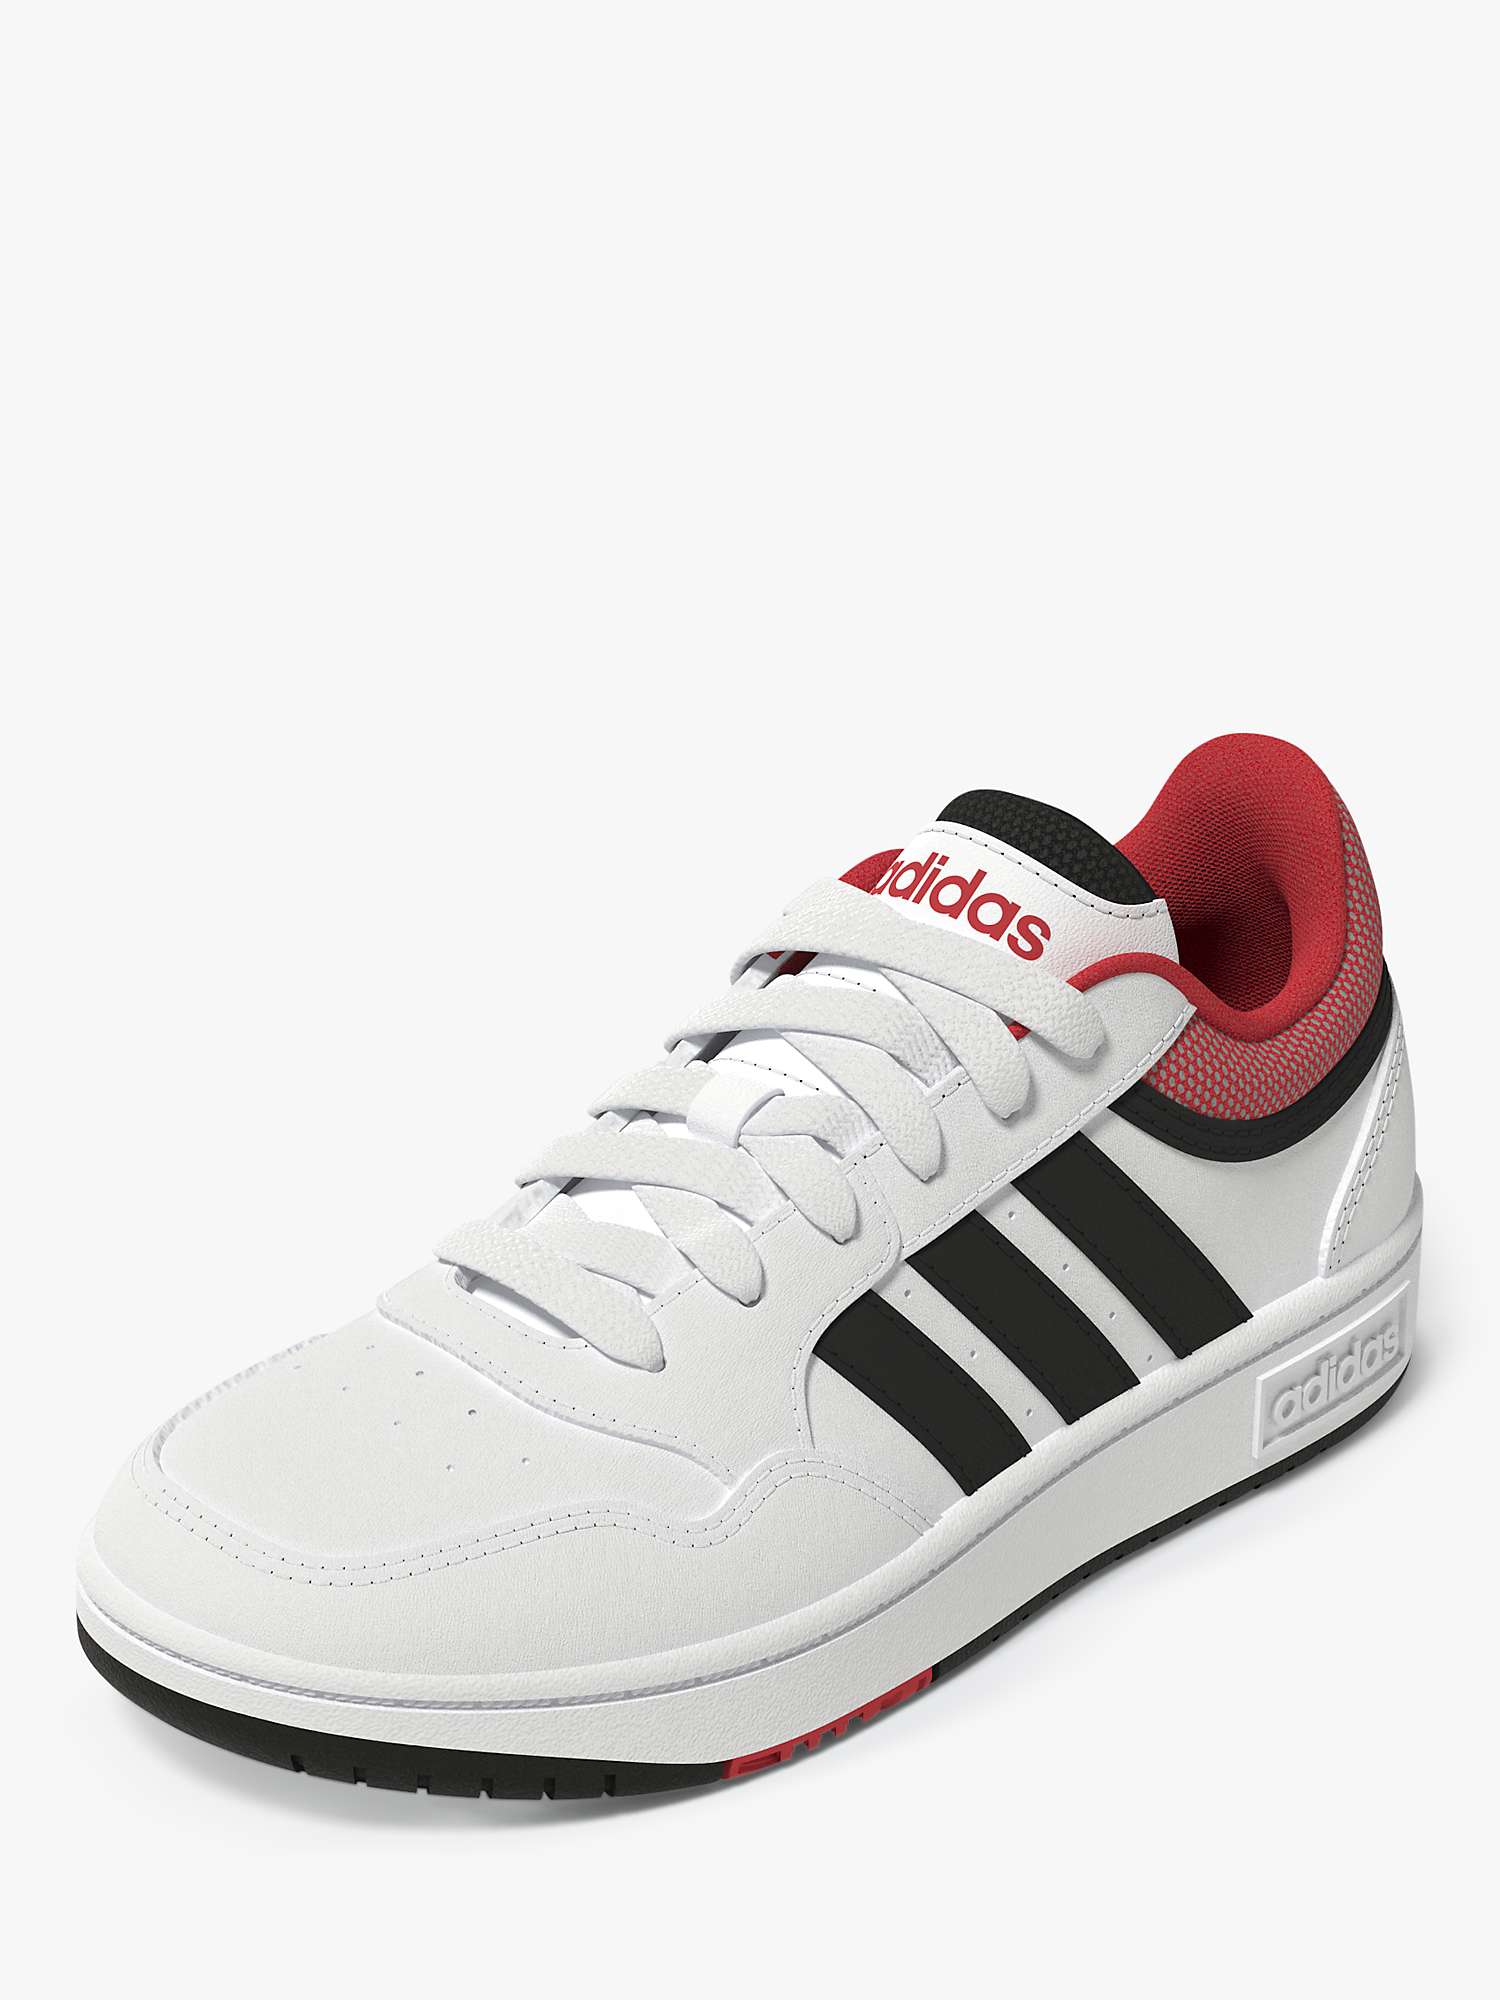 adidas Kids' Hoops Trainers, White/red at John Lewis & Partners